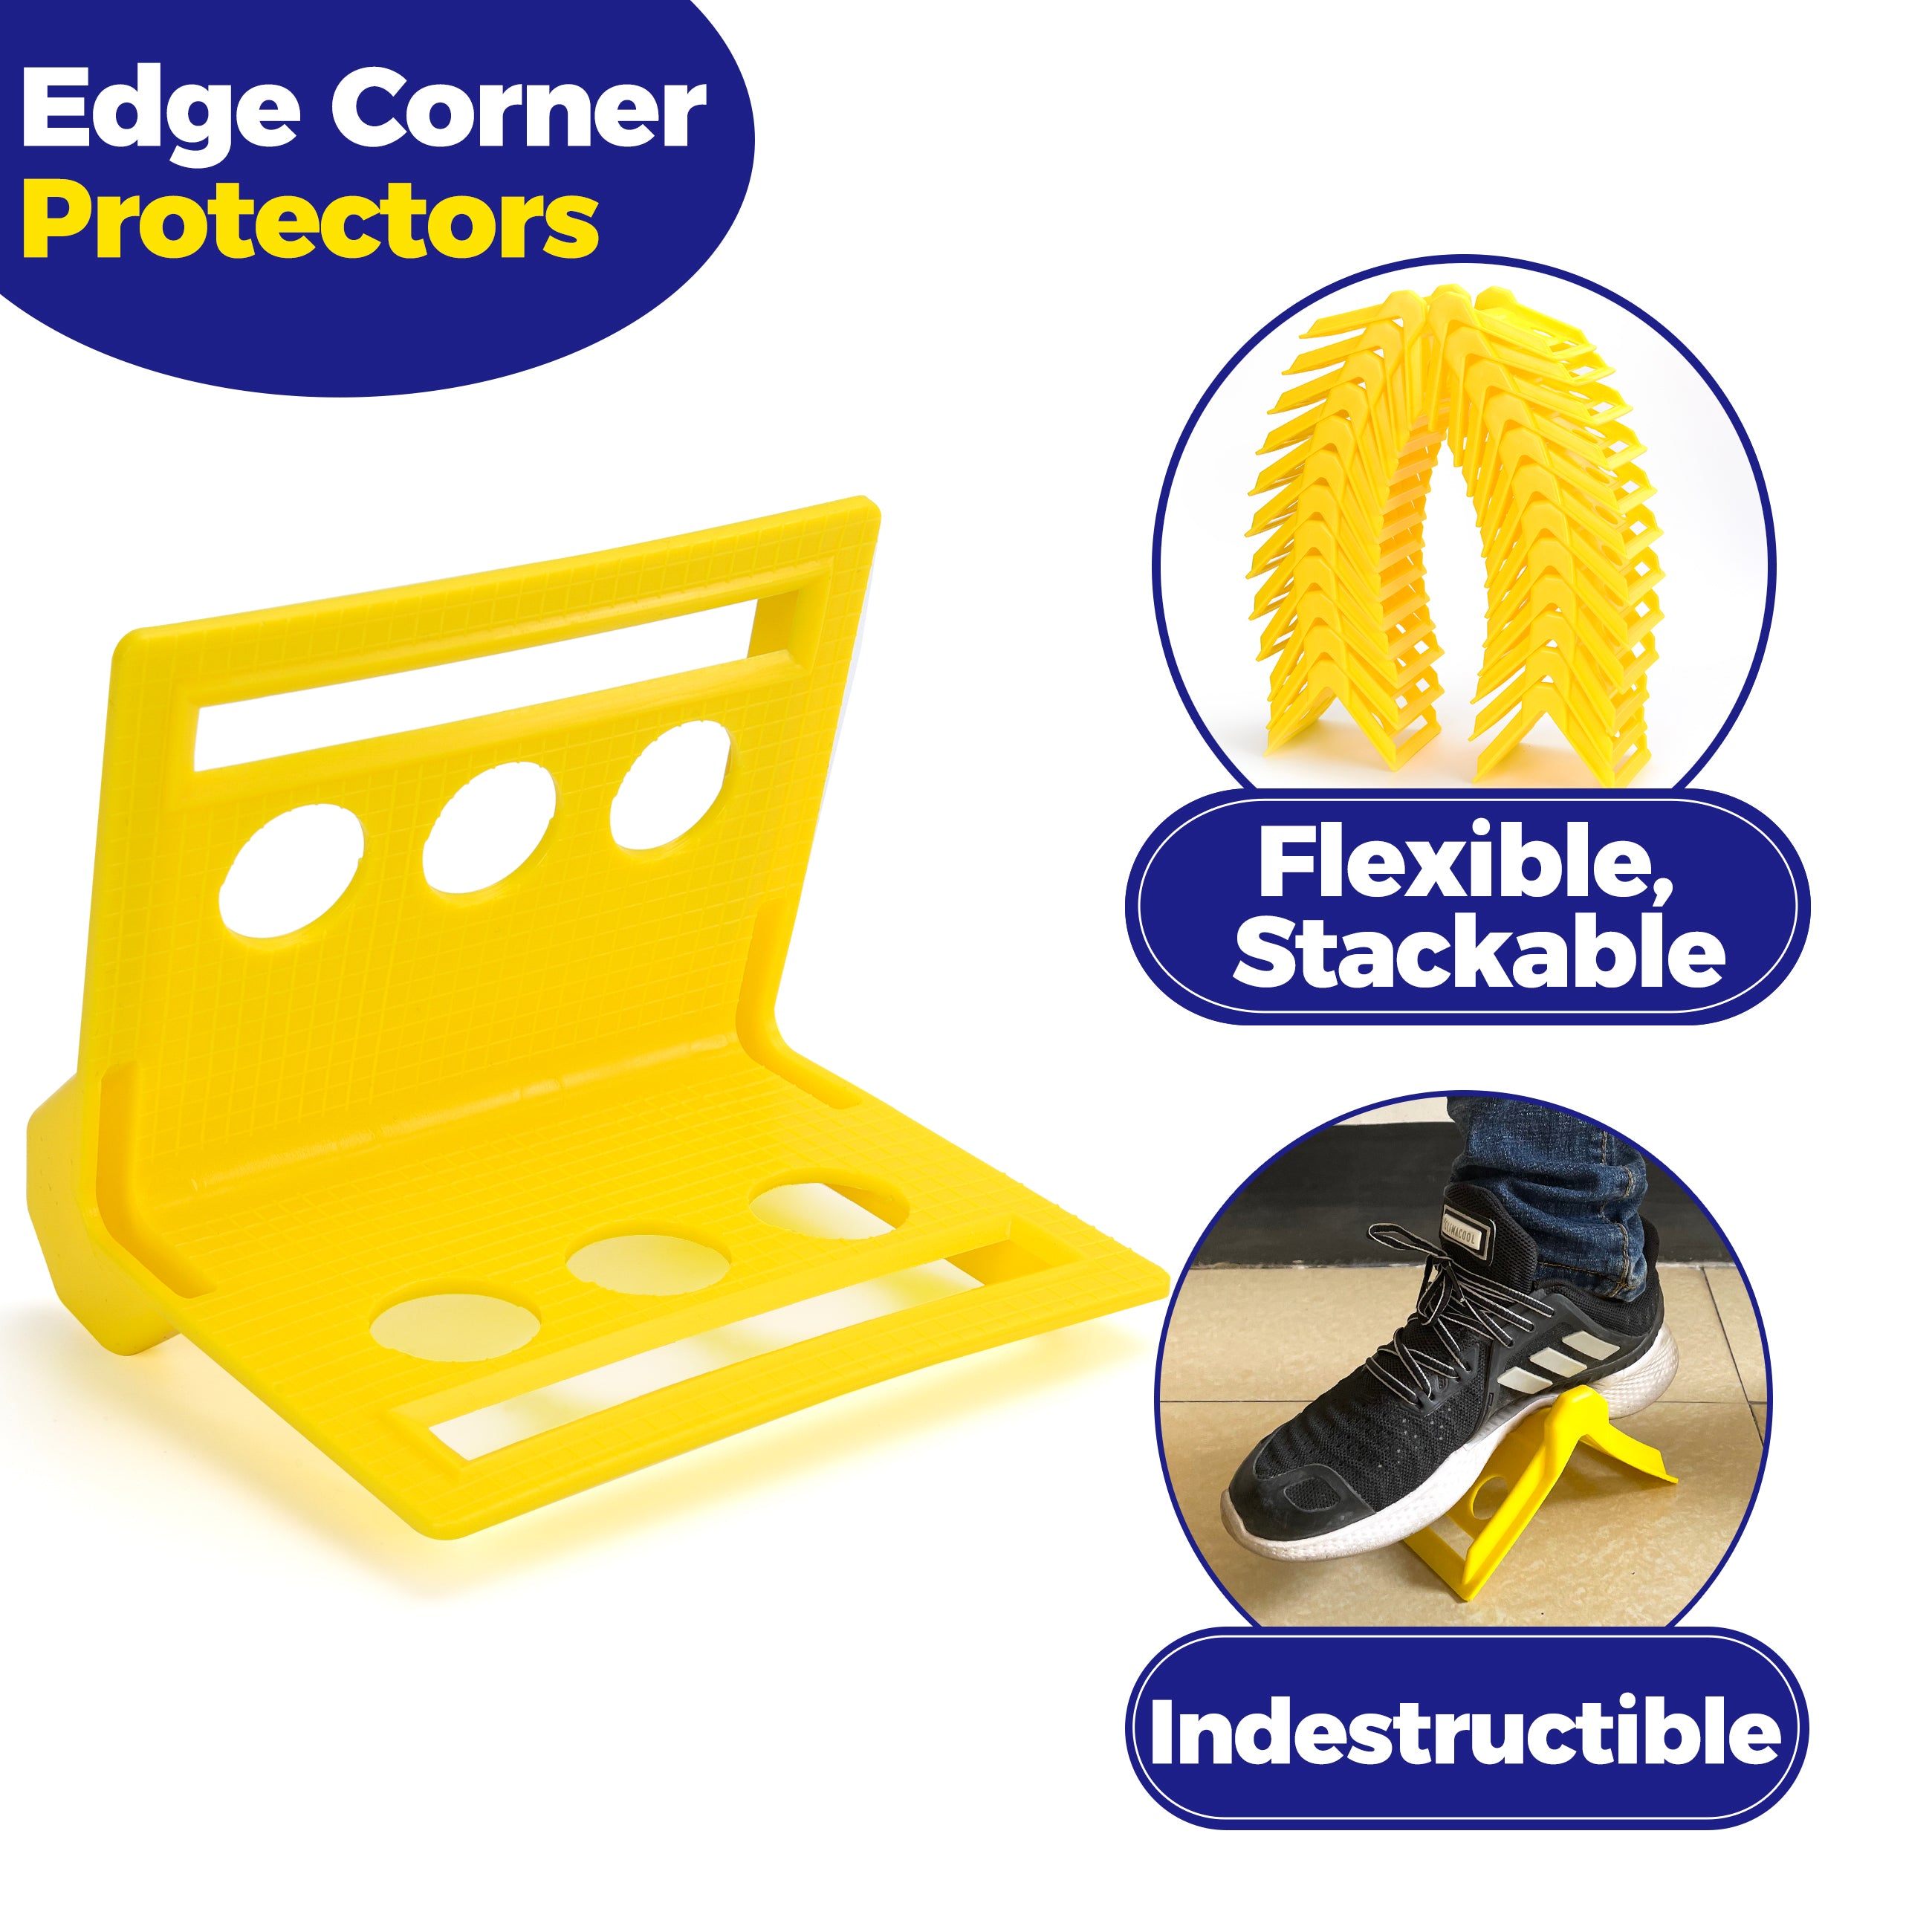 Storage Standard Edge Corner Protectors Industrial Shipping Strap Flatbed Guards with Carrying Case 24 Pack